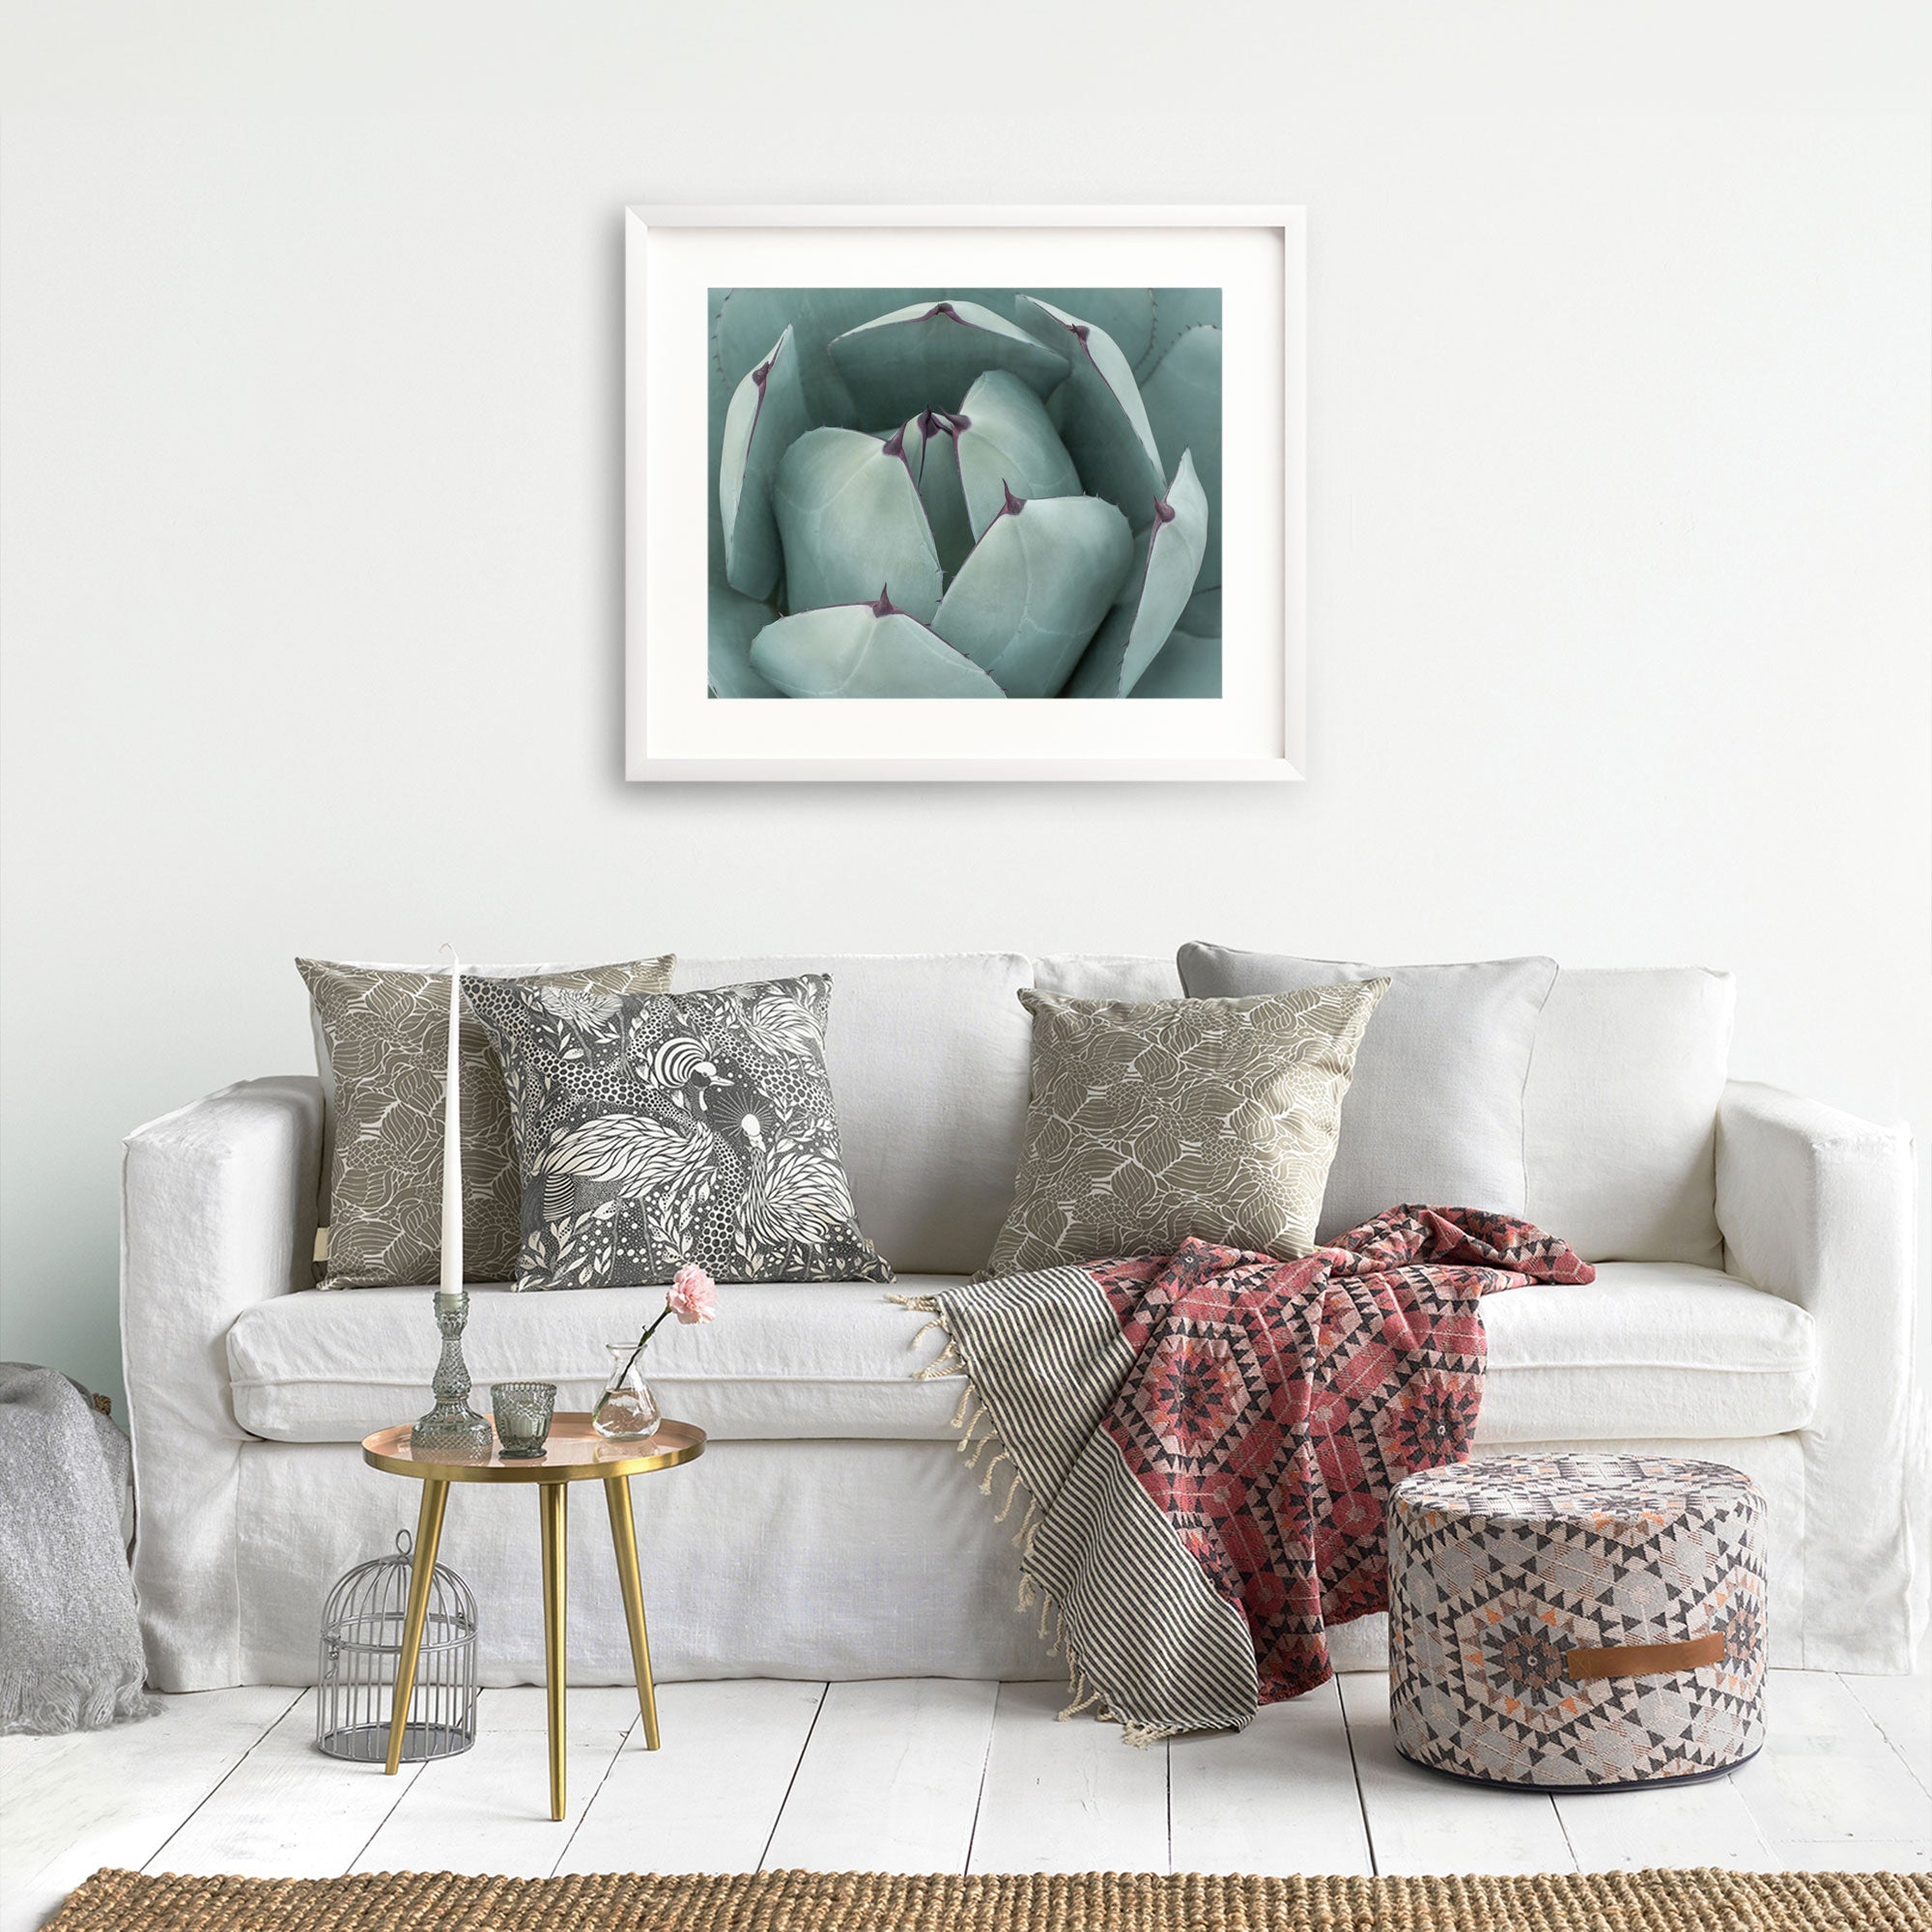 A cozy living room featuring a white sofa with decorative gray and black pillows, an Abstract Teal Green Botanical Print, &#39;Teal Petals&#39; by Offley Green above it, a small round table with books, and a red patterned throw